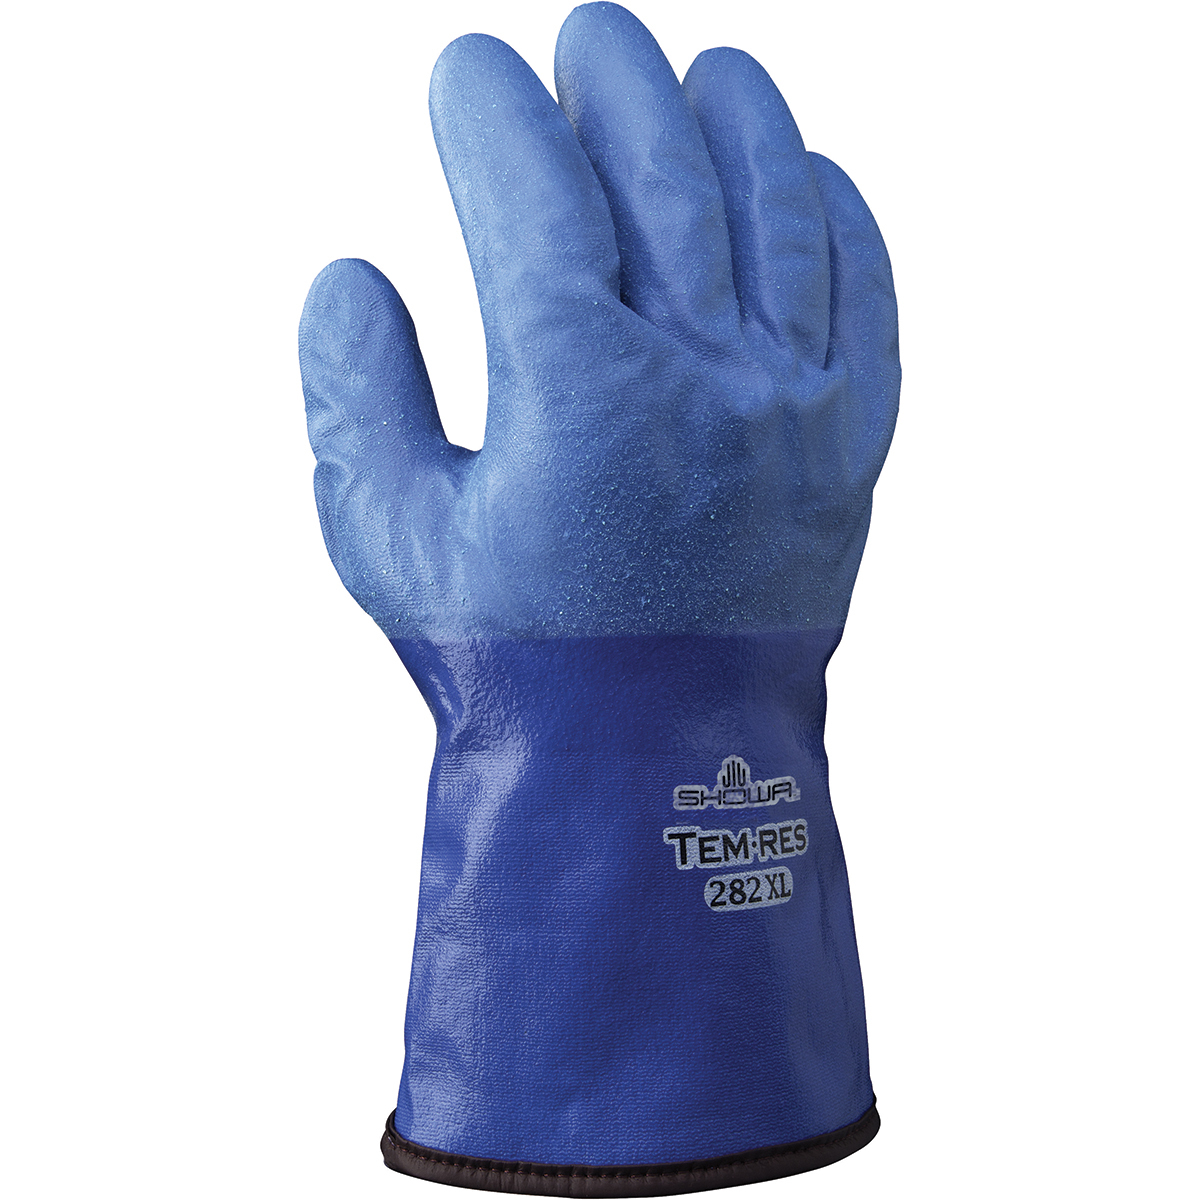 SHOWA® Size 11 Blue TEM-RES Polyurethane Insulated/Acrylic Lined Cold Weather Gloves